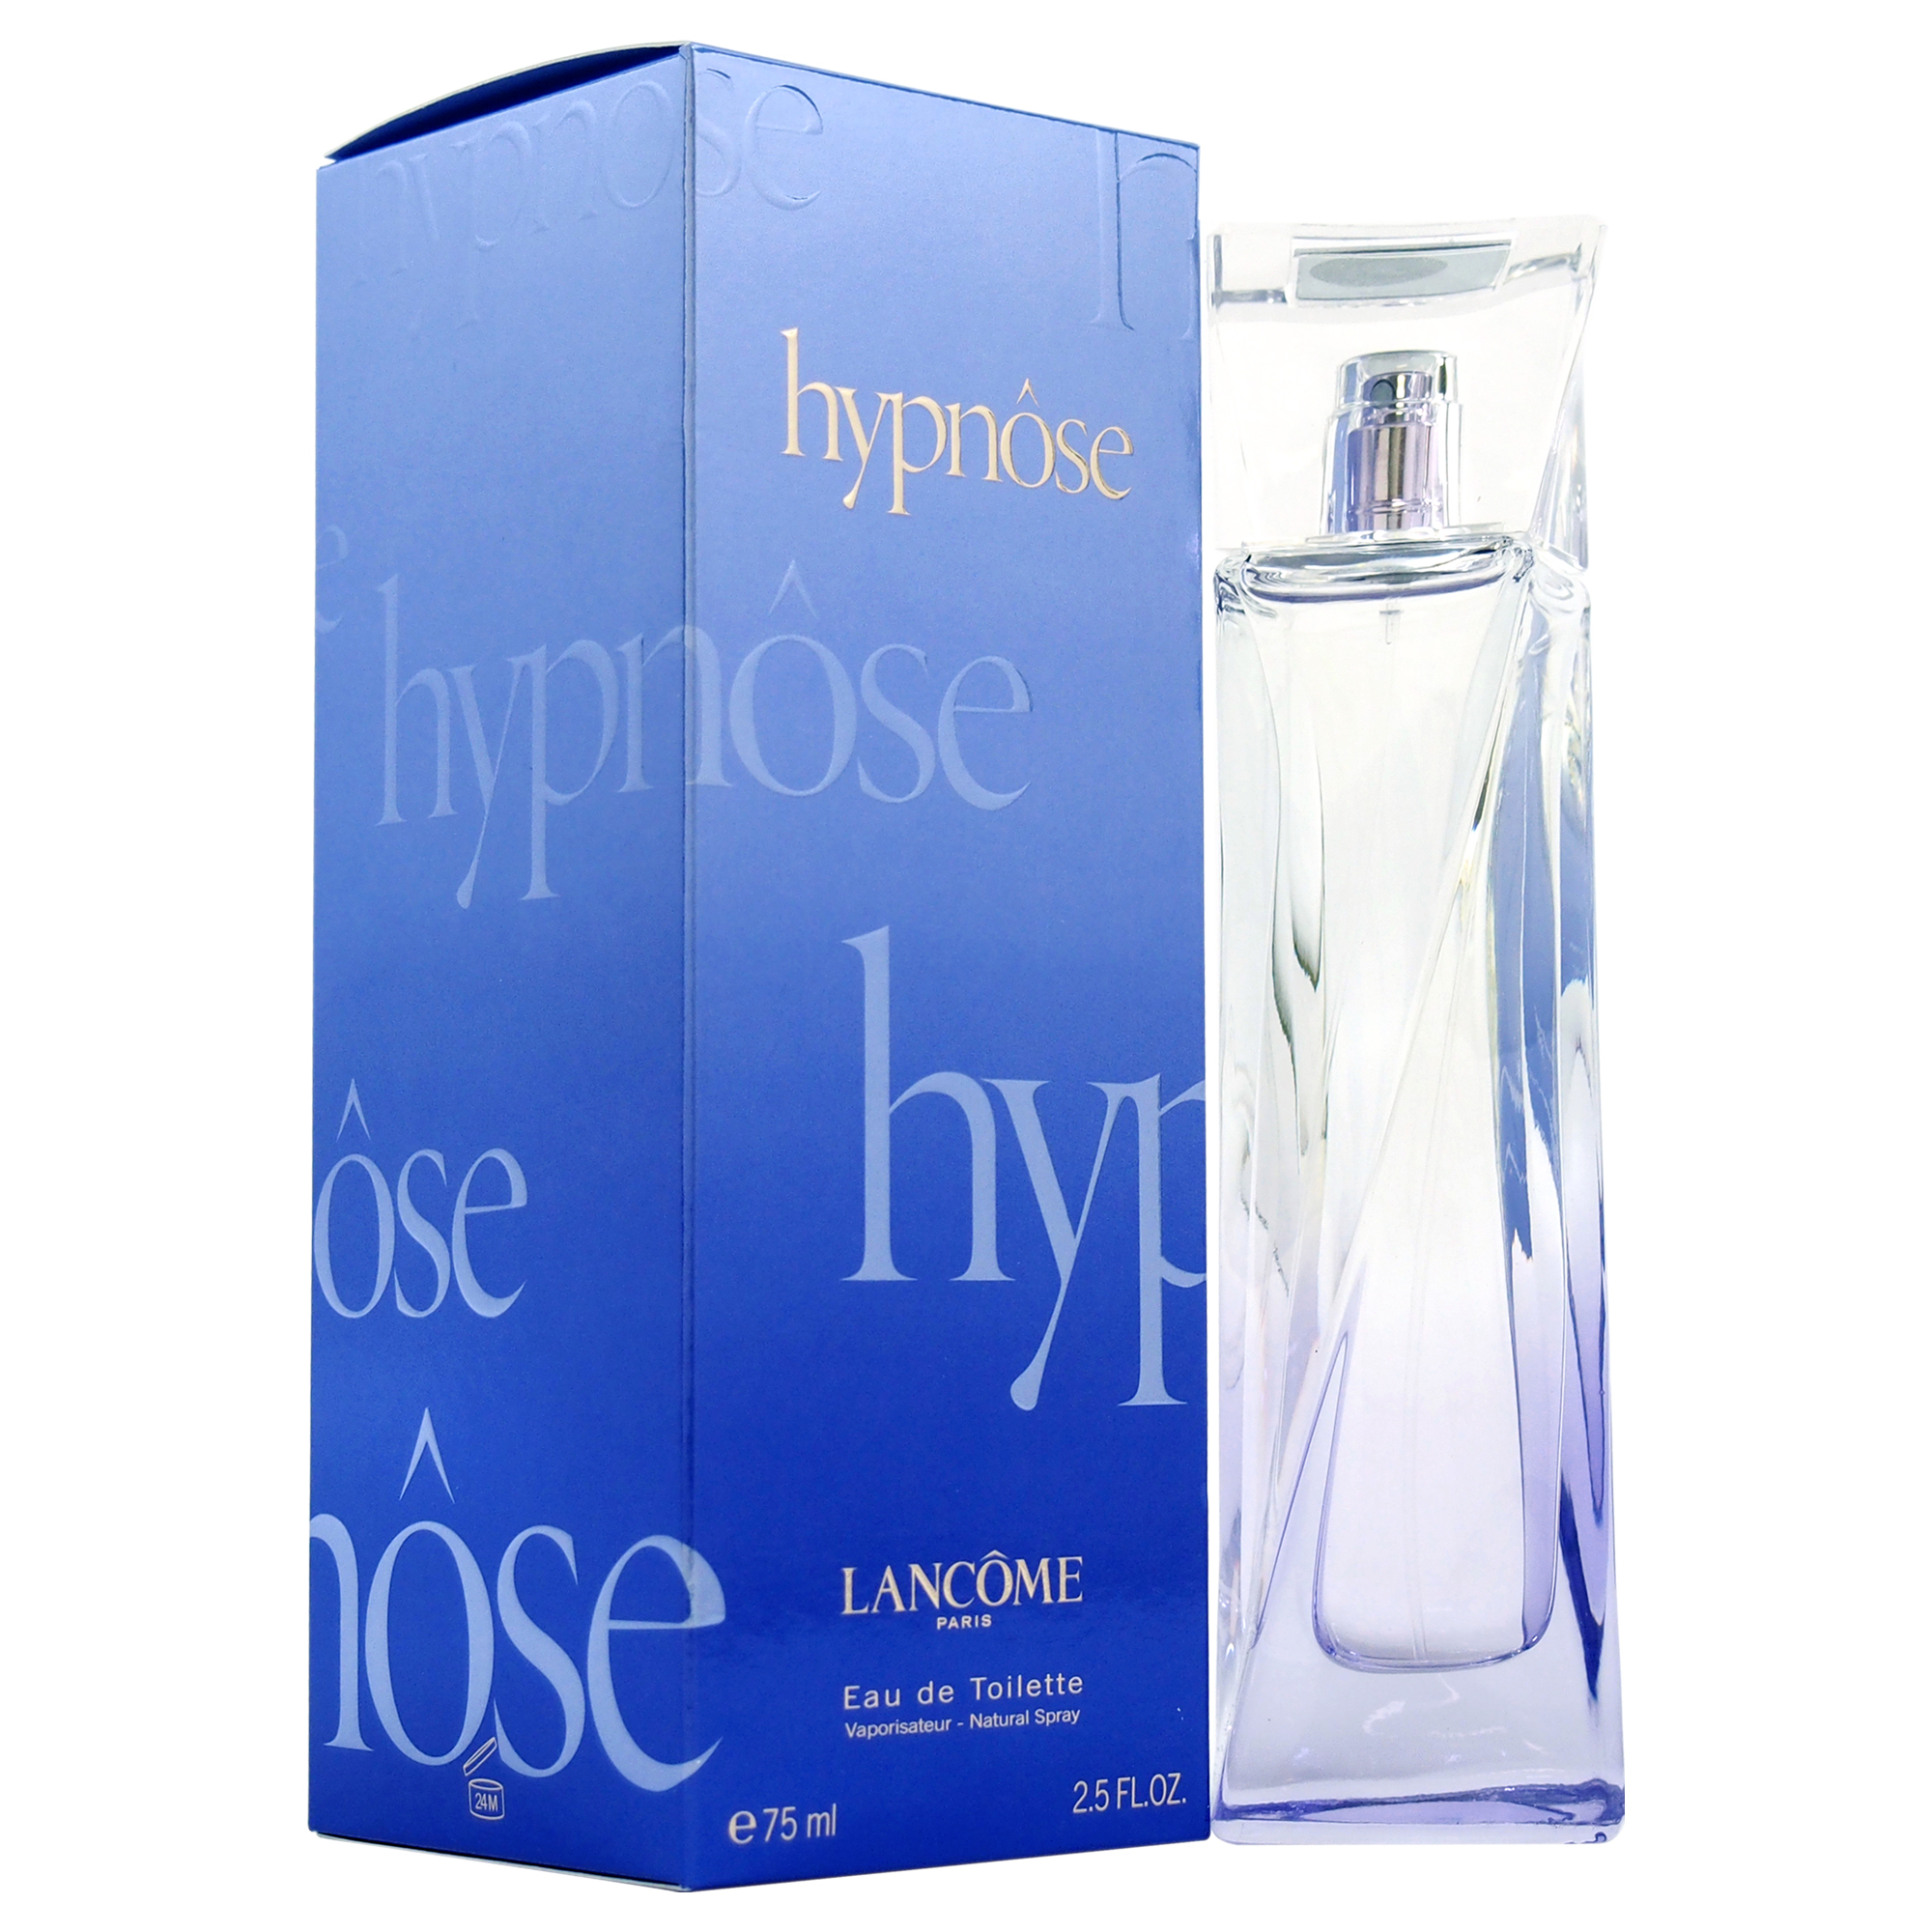 EAN 3605530246644 product image for Hypnose by Lancome for Women - 2.5 oz EDT Spray | upcitemdb.com